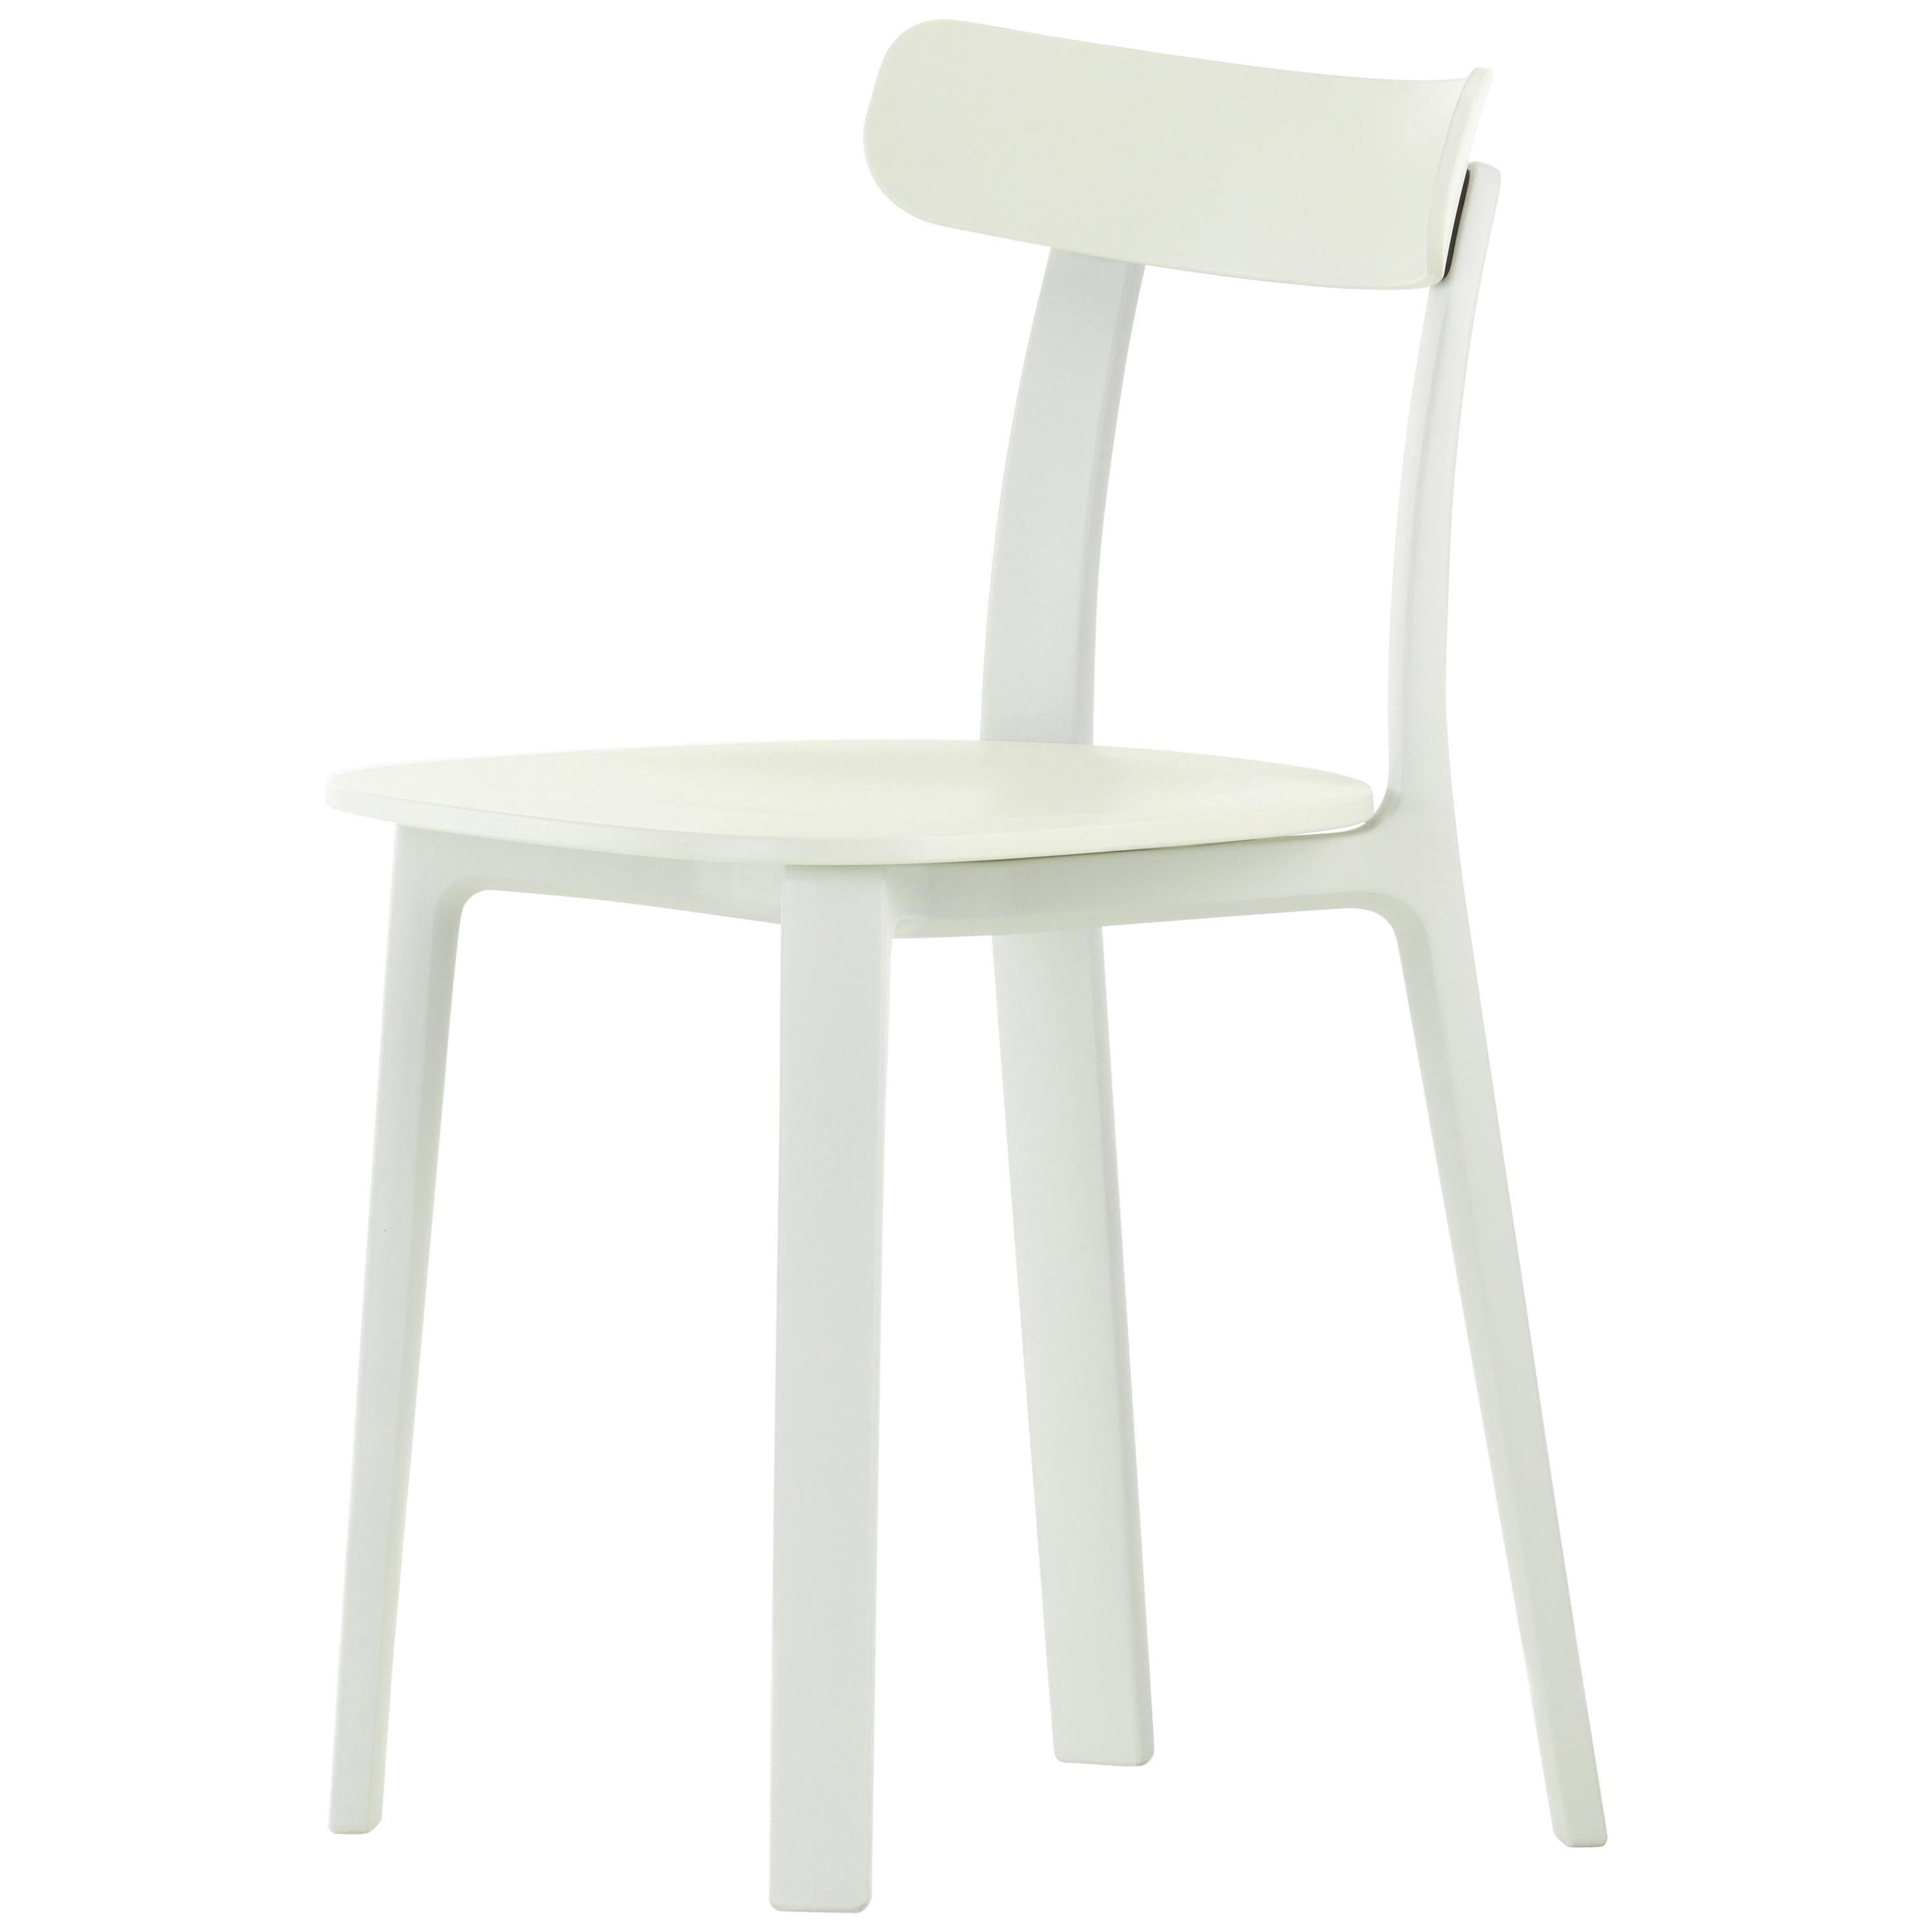 Vitra All Plastic Chair in White Two-Tone by Jasper Morrison im Angebot